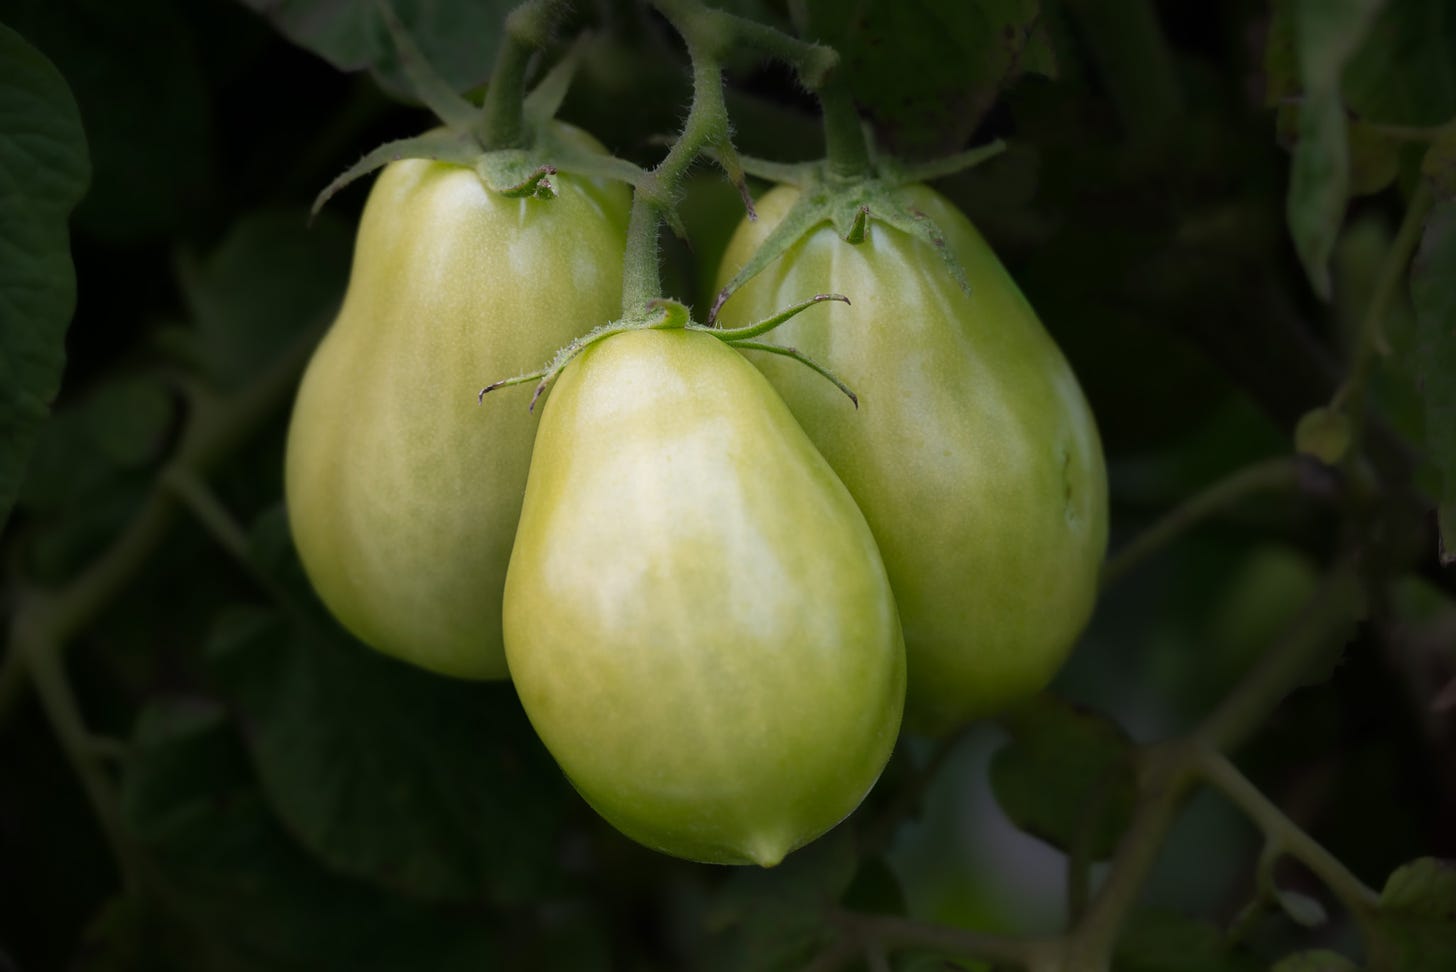 A clump of three green Roma tomatoes still ripening on the vine